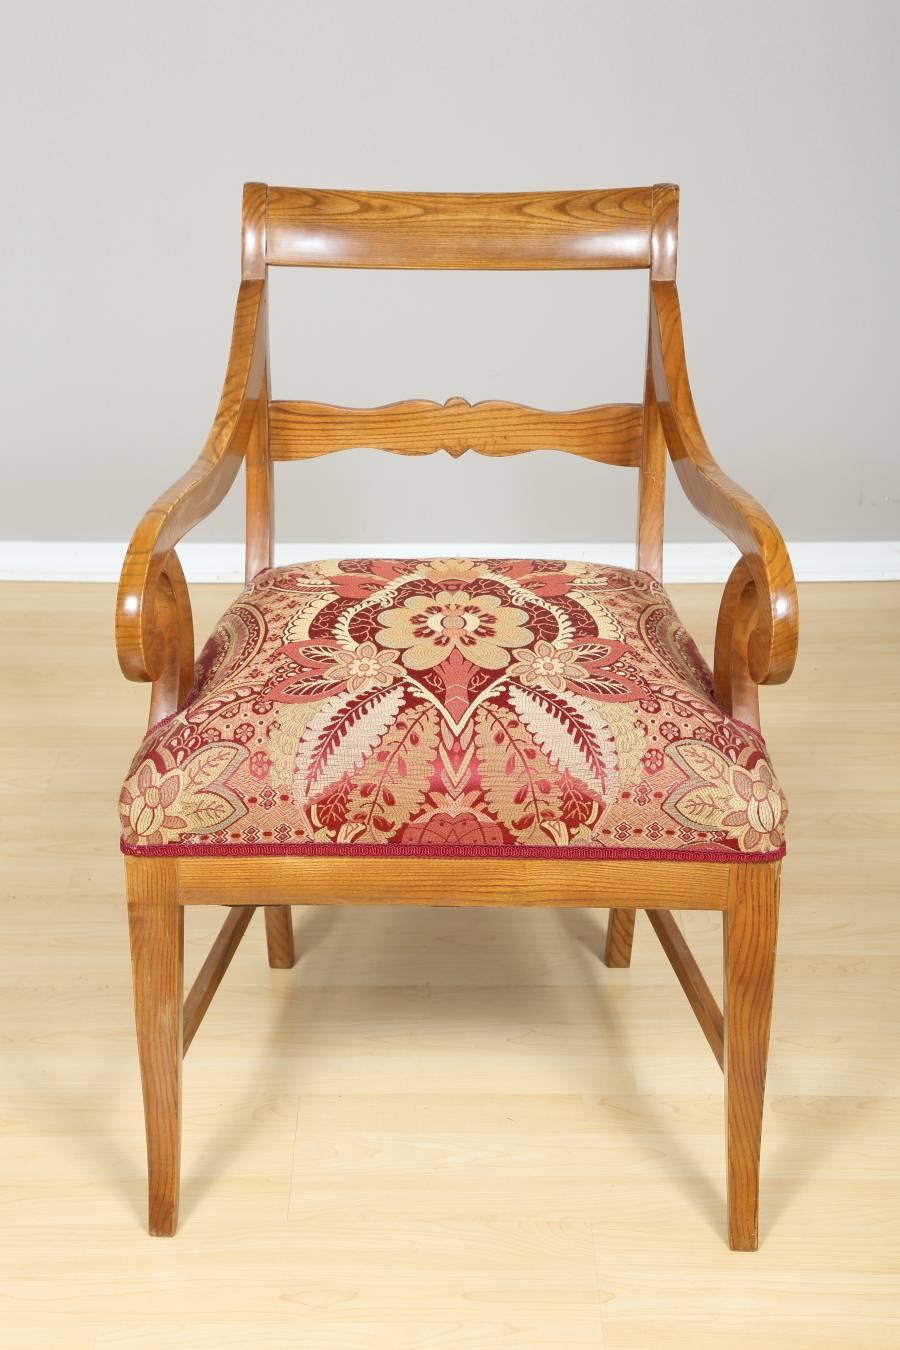 Biedermeier Ashtree side chair, circa 1840. Elegant side chair with ash-tree frame from northern Germany Biedermeier period. The chair has been restored, reupholstered and hand polished with natural shellac. Seat height: 19